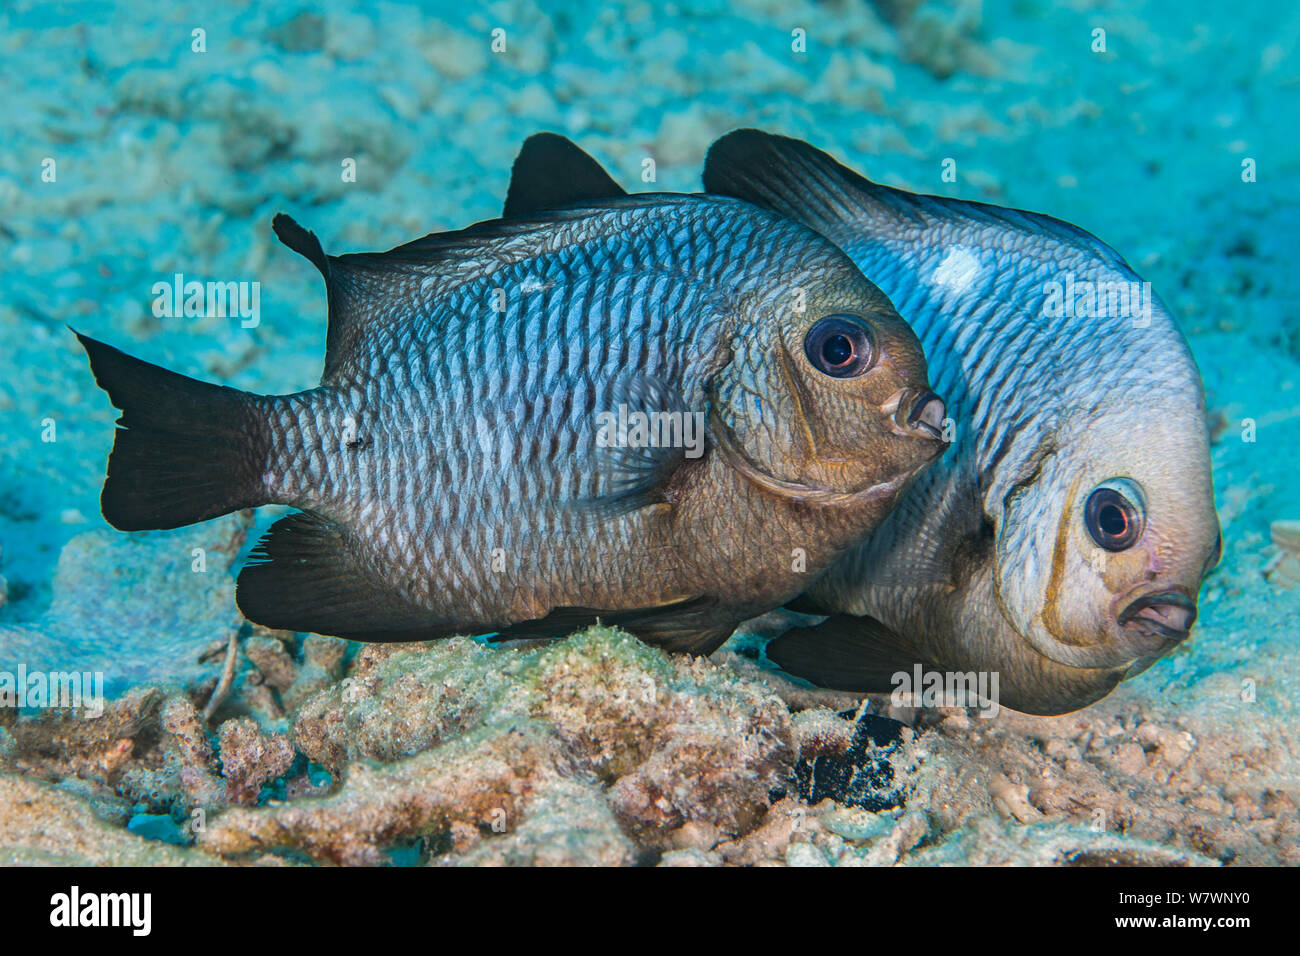 Spawning pair of Domino damselfish (Dascyllus trimaculatus) The female is in front, the male is behind and his head has gone almost white during the spawning. He will guard the eggs until they hatch. Ras Katy, Sharm El Sheikh, Sinai, Egypt. Gulf of Aqaba, Red Sea Stock Photo